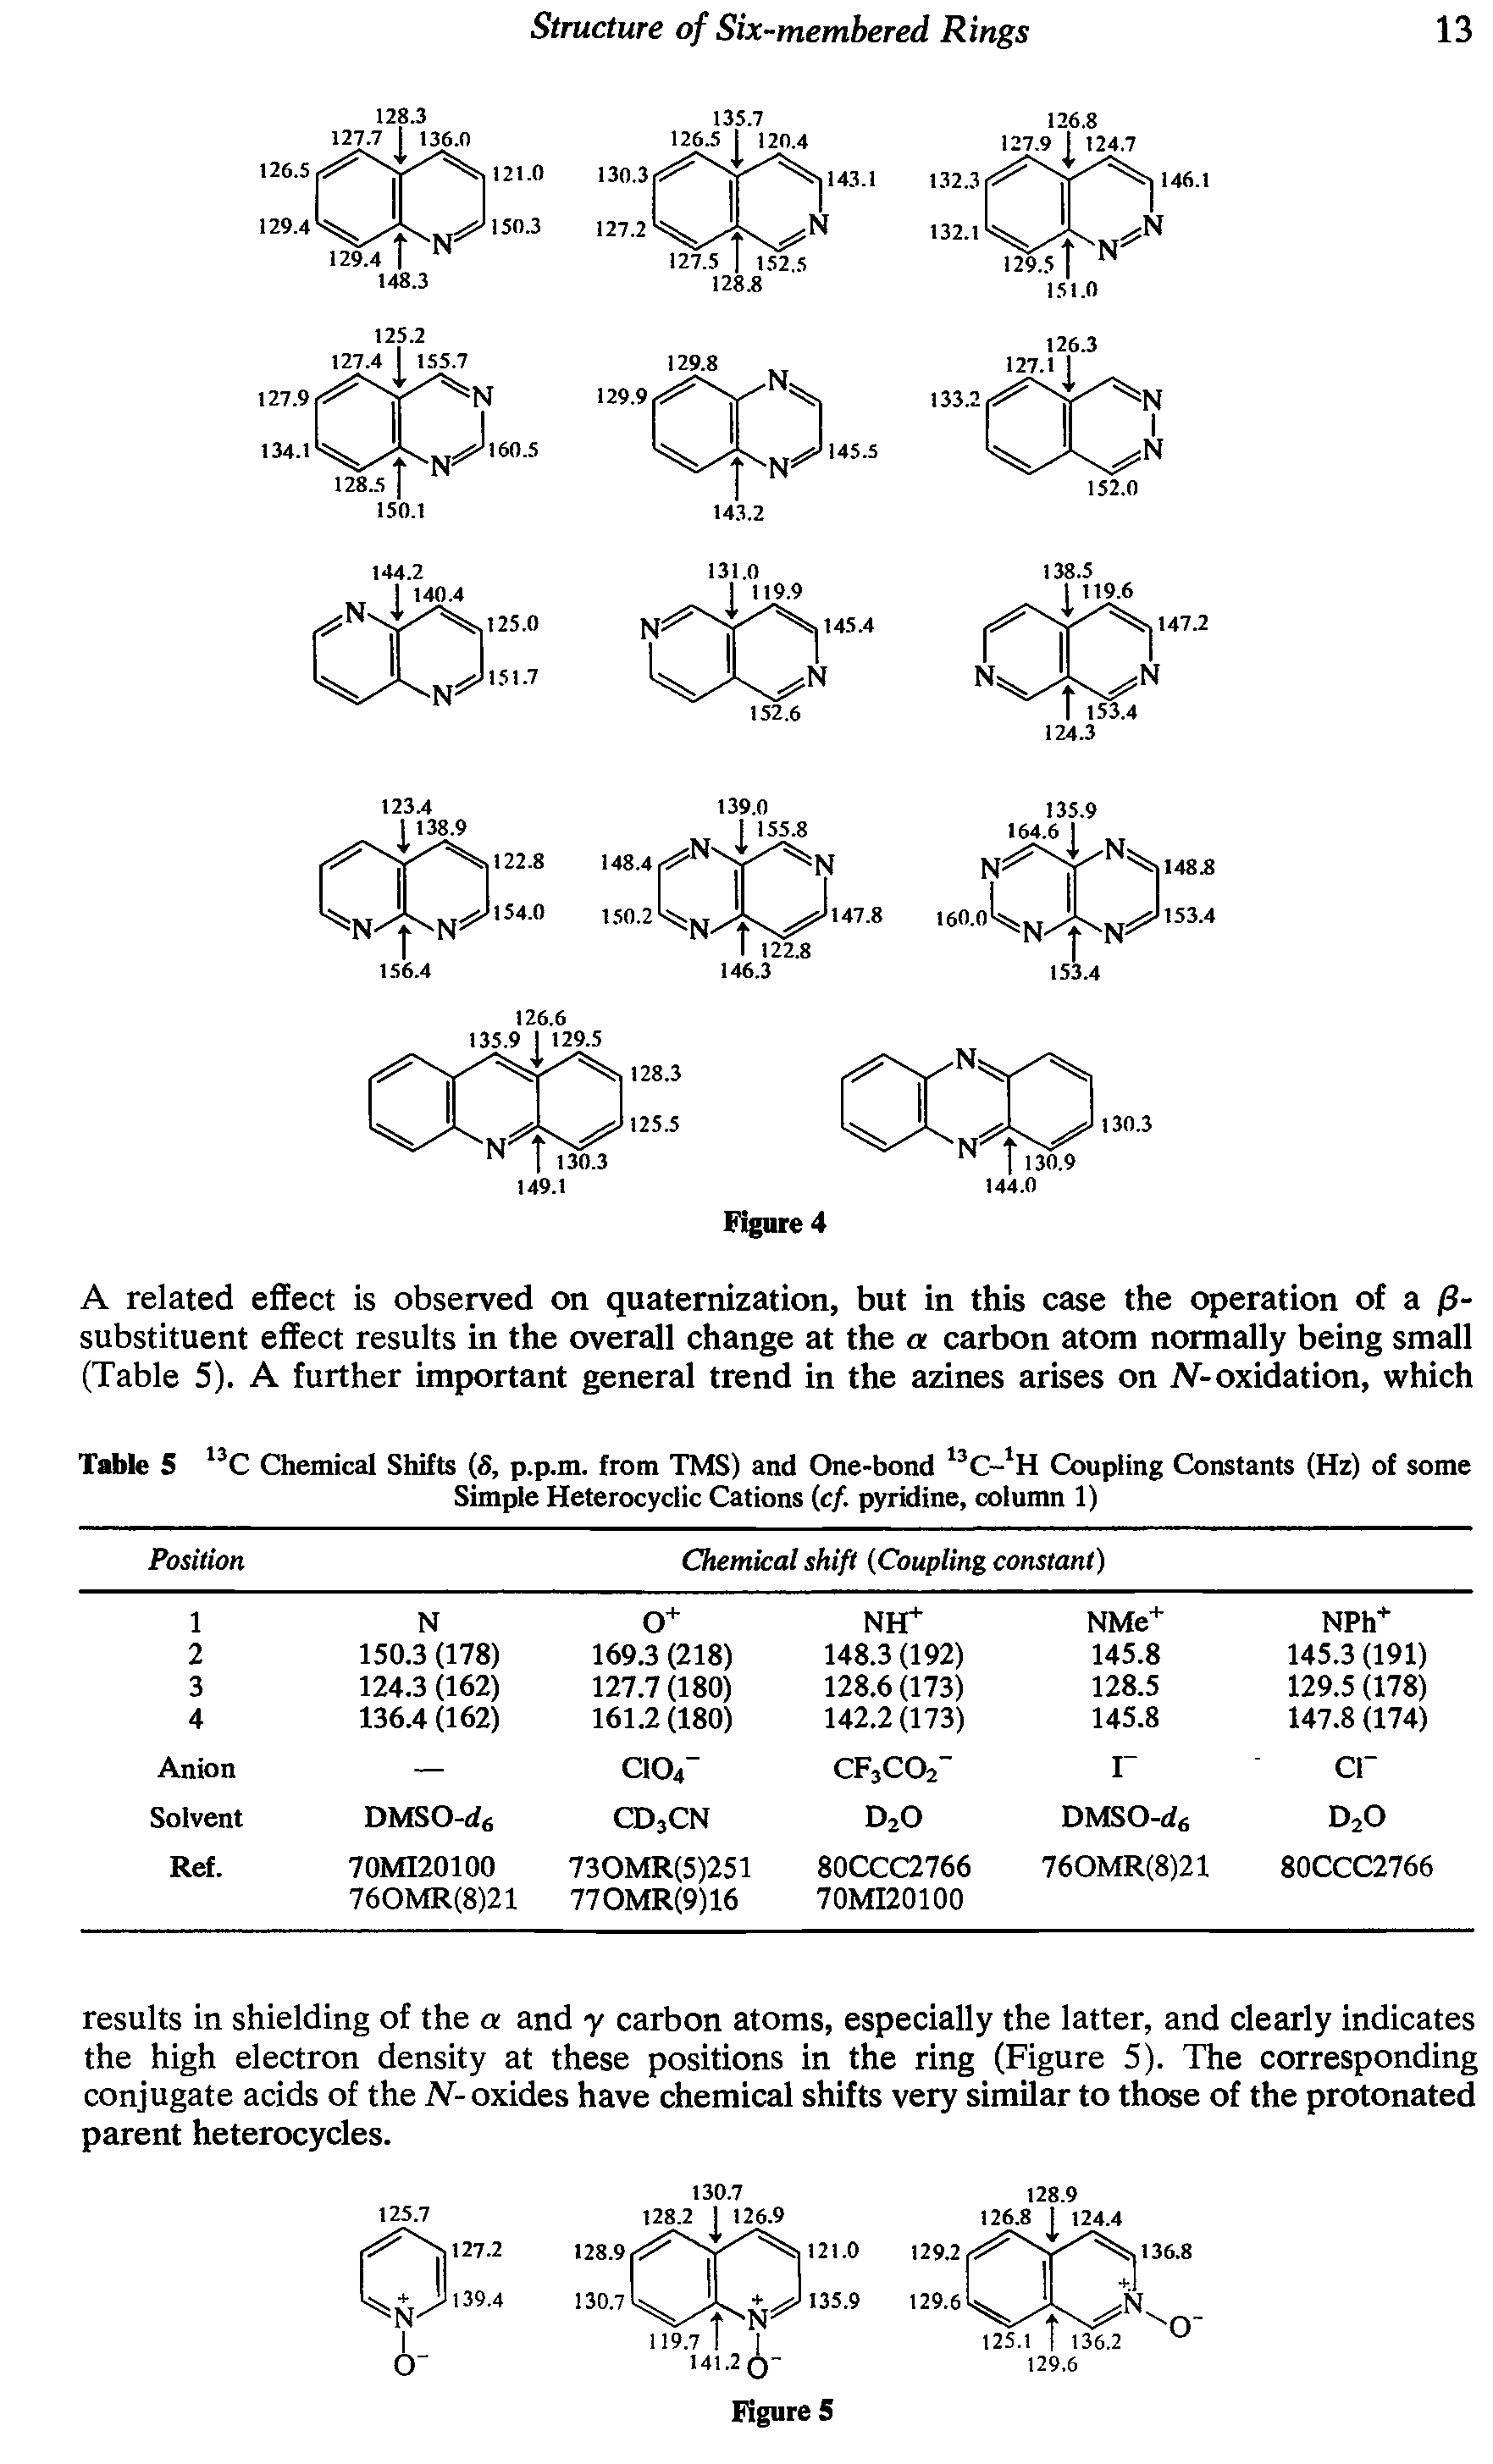 Table 5 13C Chemical Shifts (S, p.p.m. from TMS) and One-bond l3C-1H Coupling Constants (Hz) of some Simple Heterocyclic Cations (cf. pyridine, column 1)...